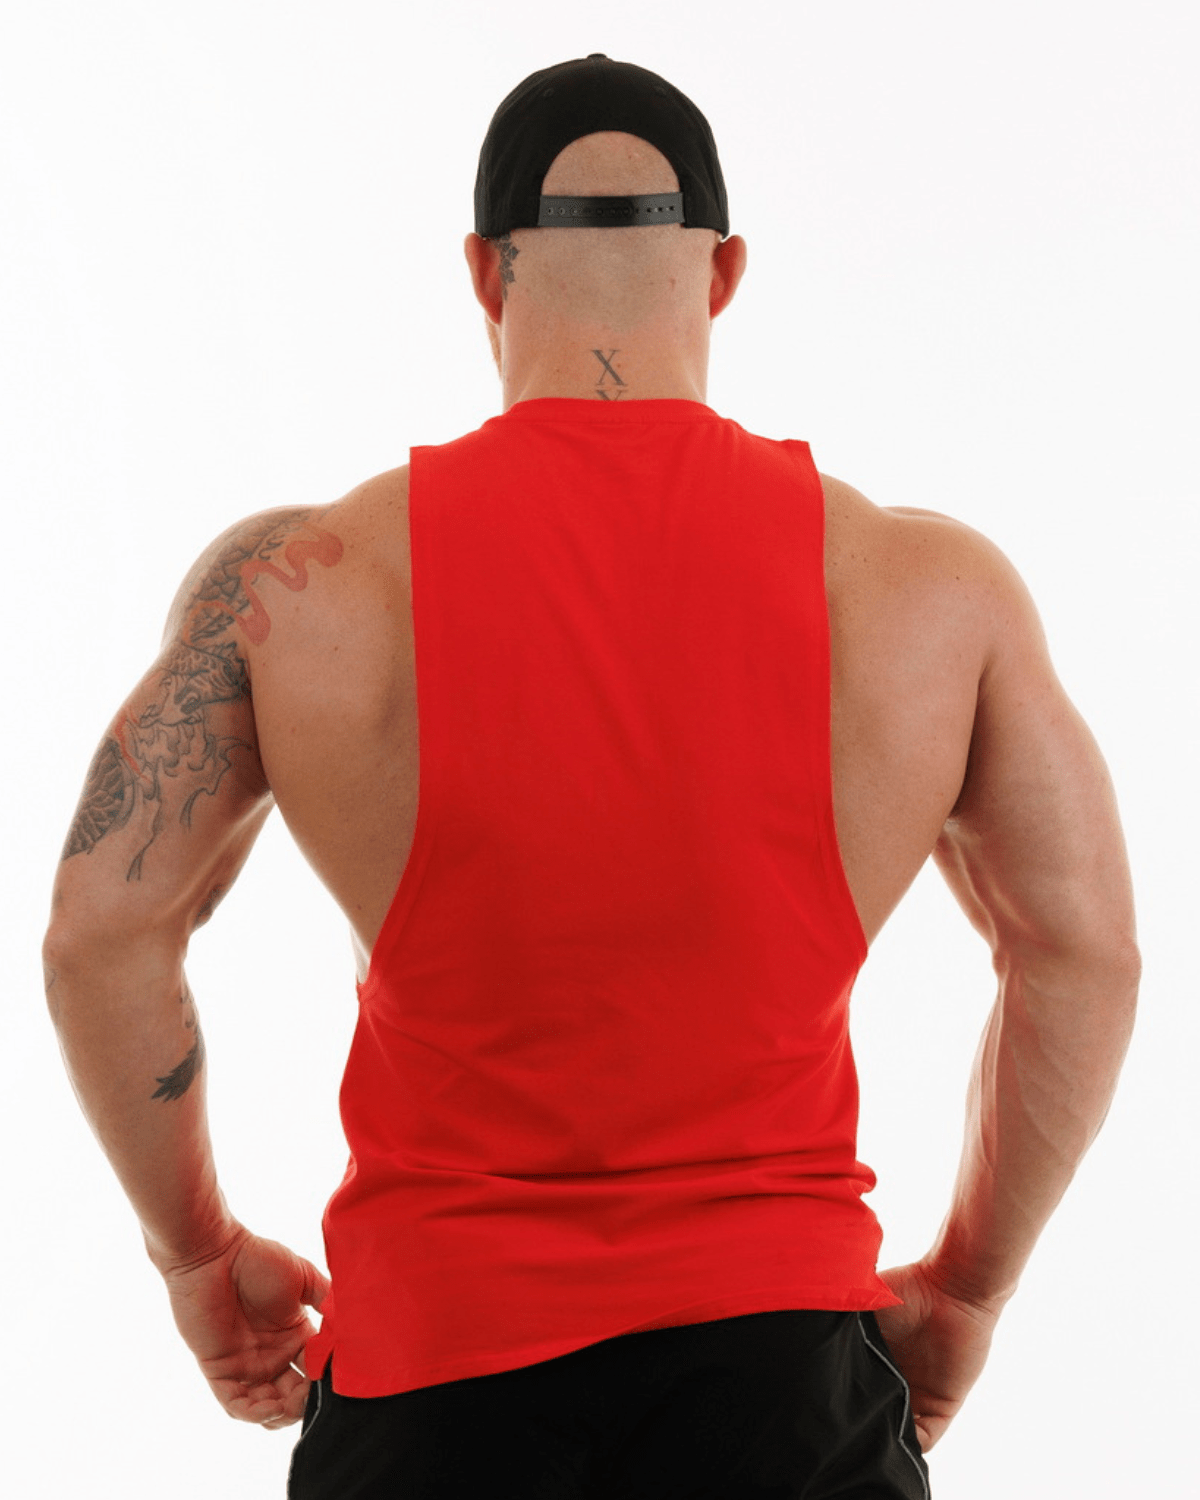 RigFit Tank S'22 Boxed Tank - Red